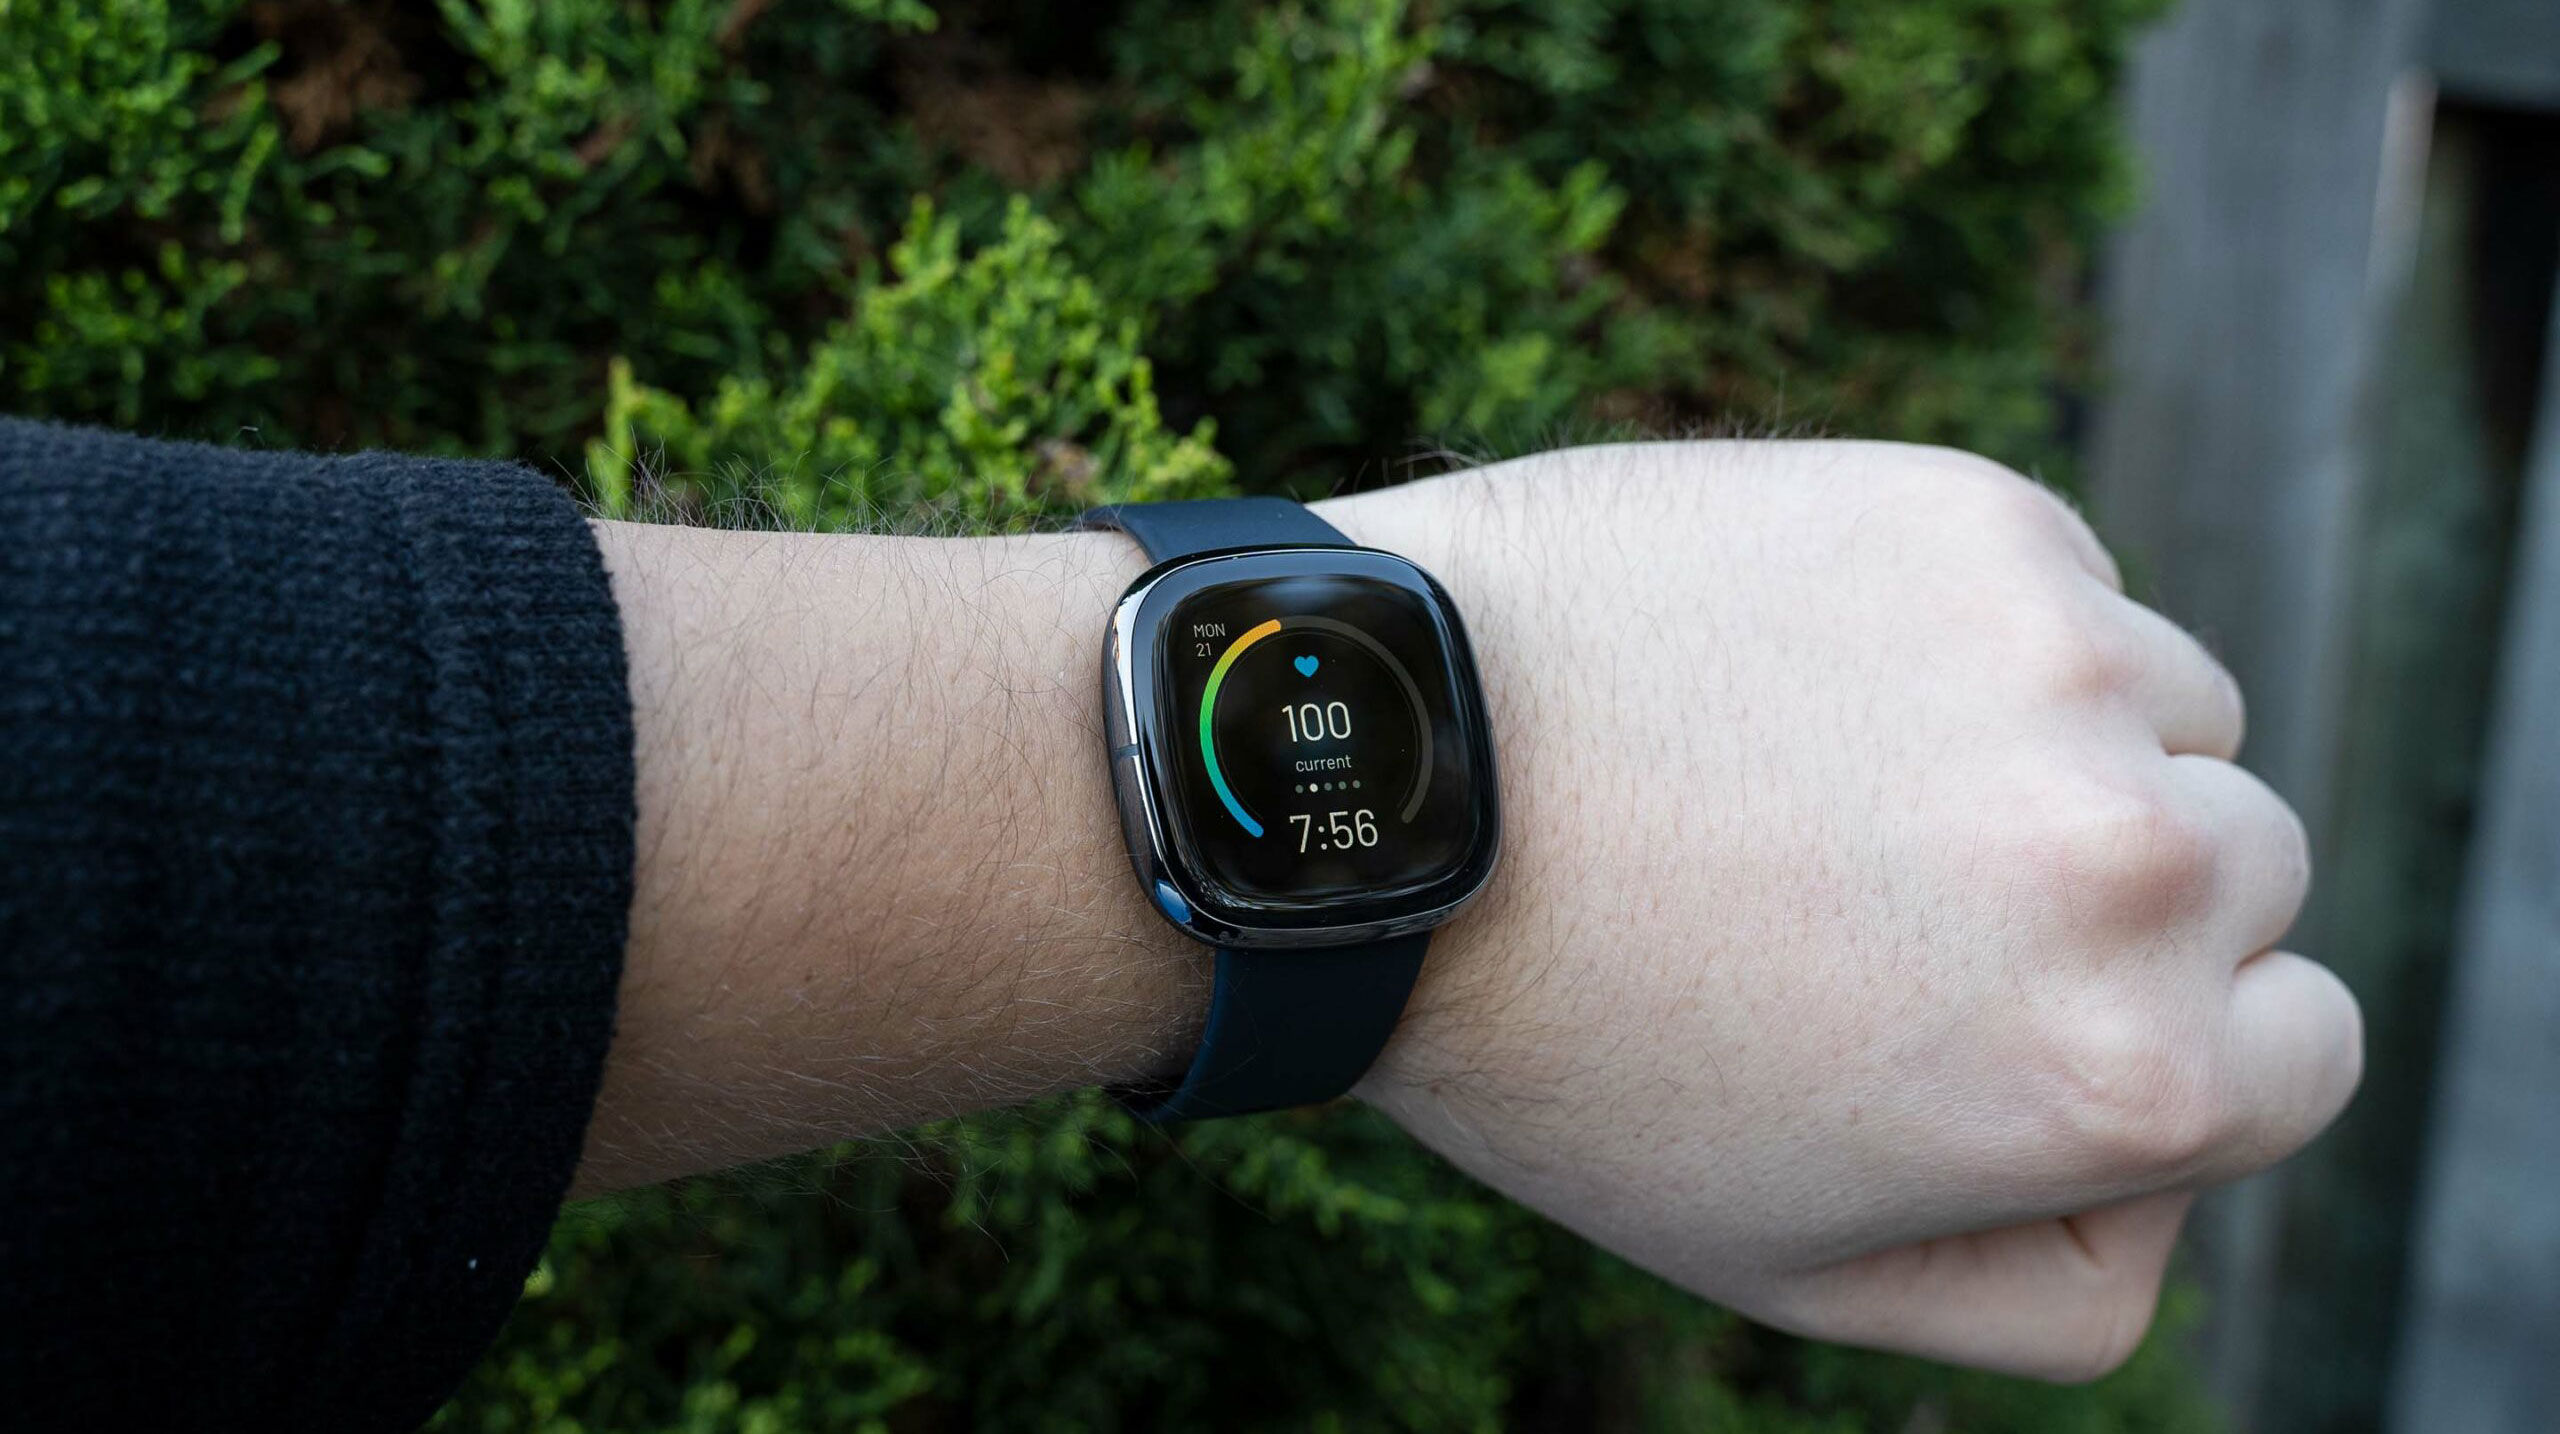 It looks like Fitbit's wearables are getting a new snore-tracking feature